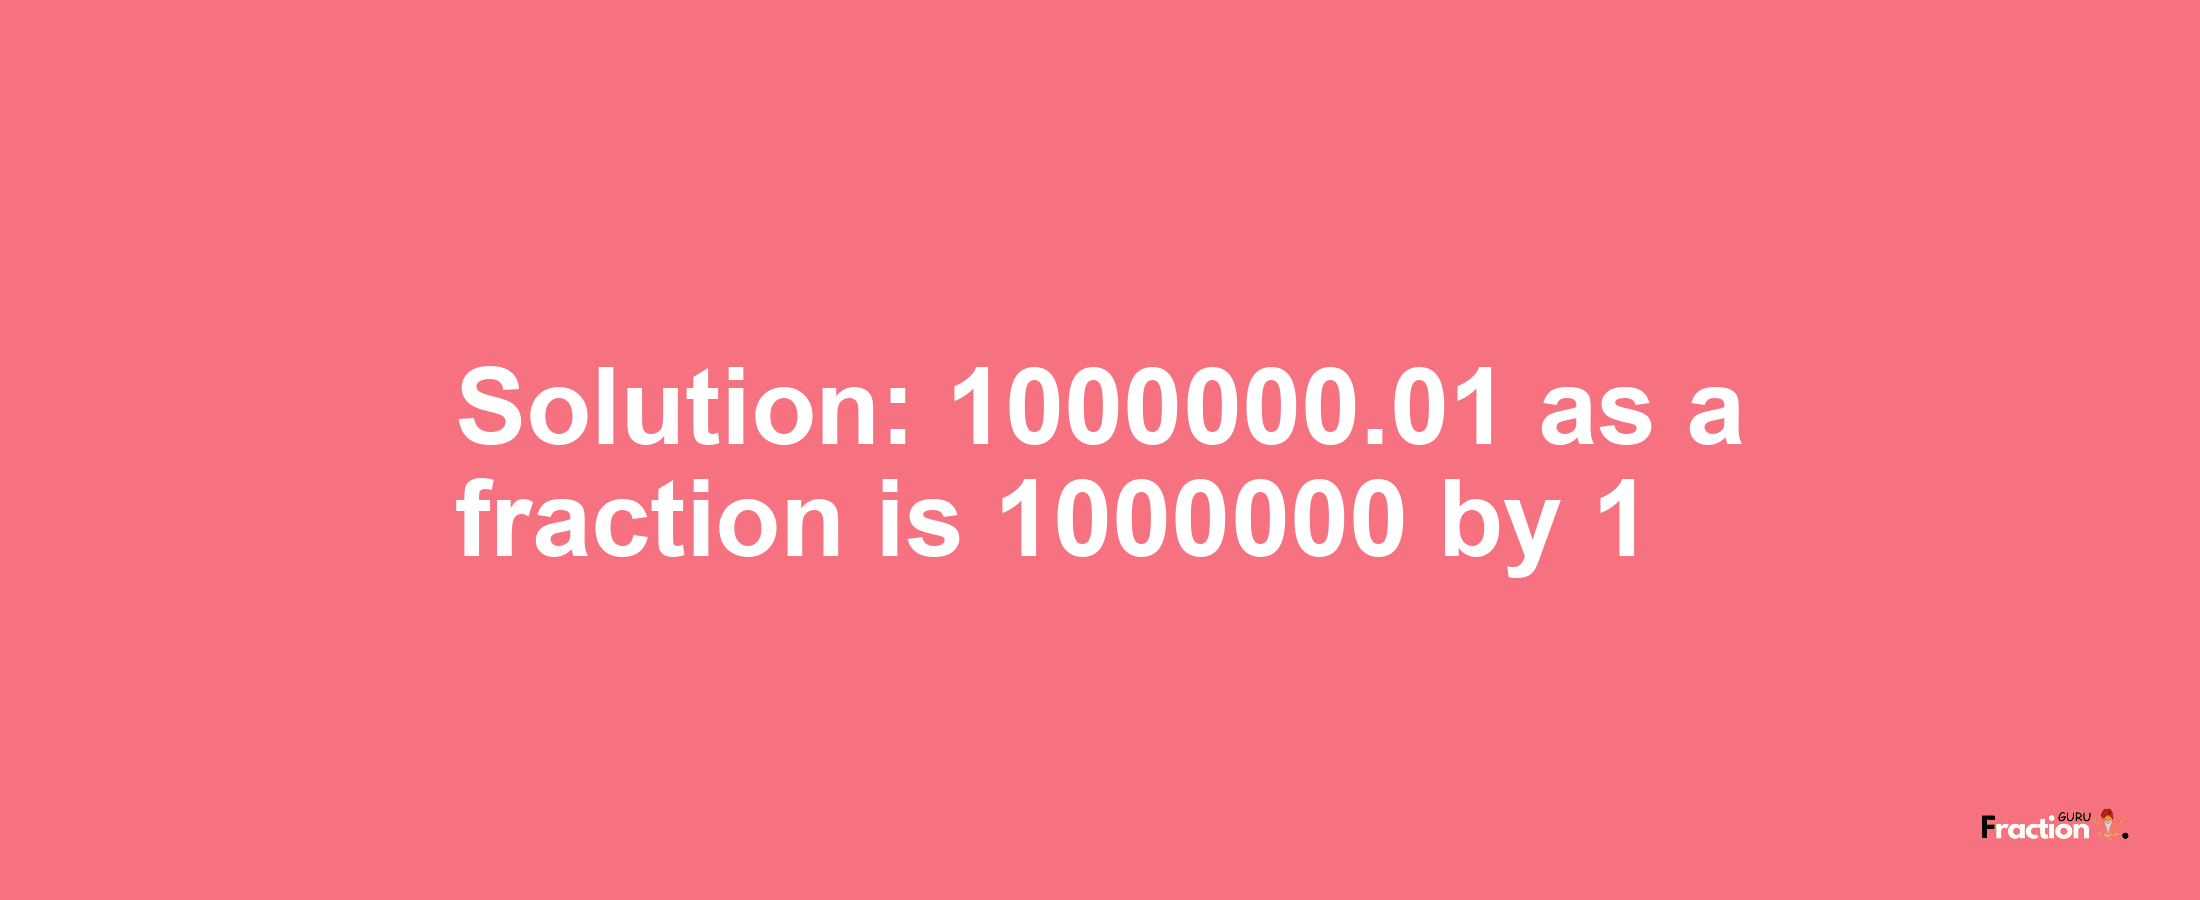 Solution:1000000.01 as a fraction is 1000000/1